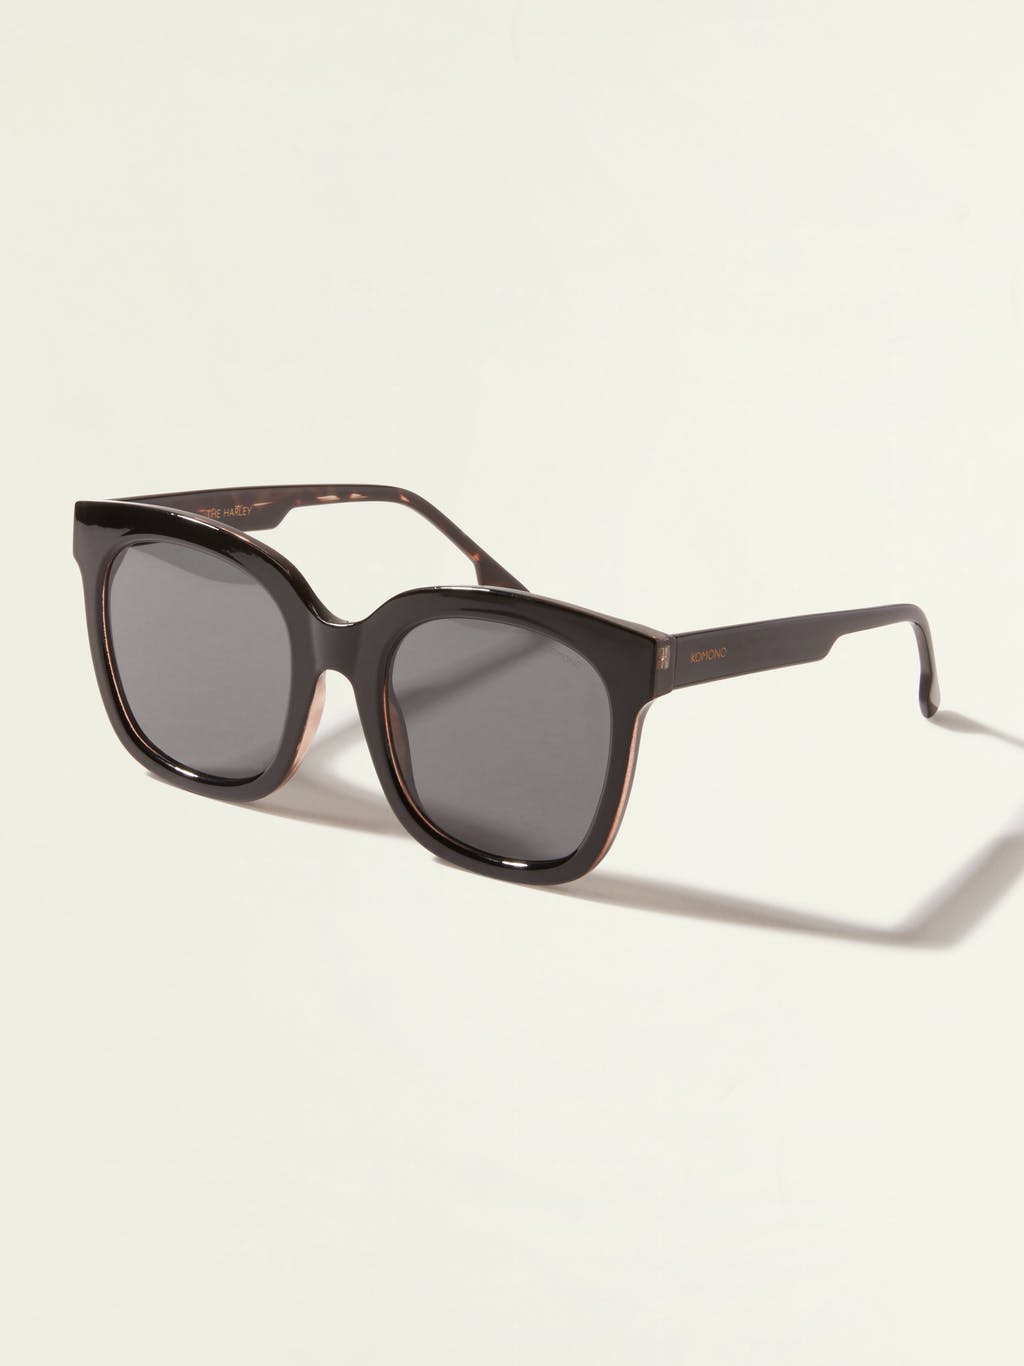 Harley Rounded Square Sunglasses